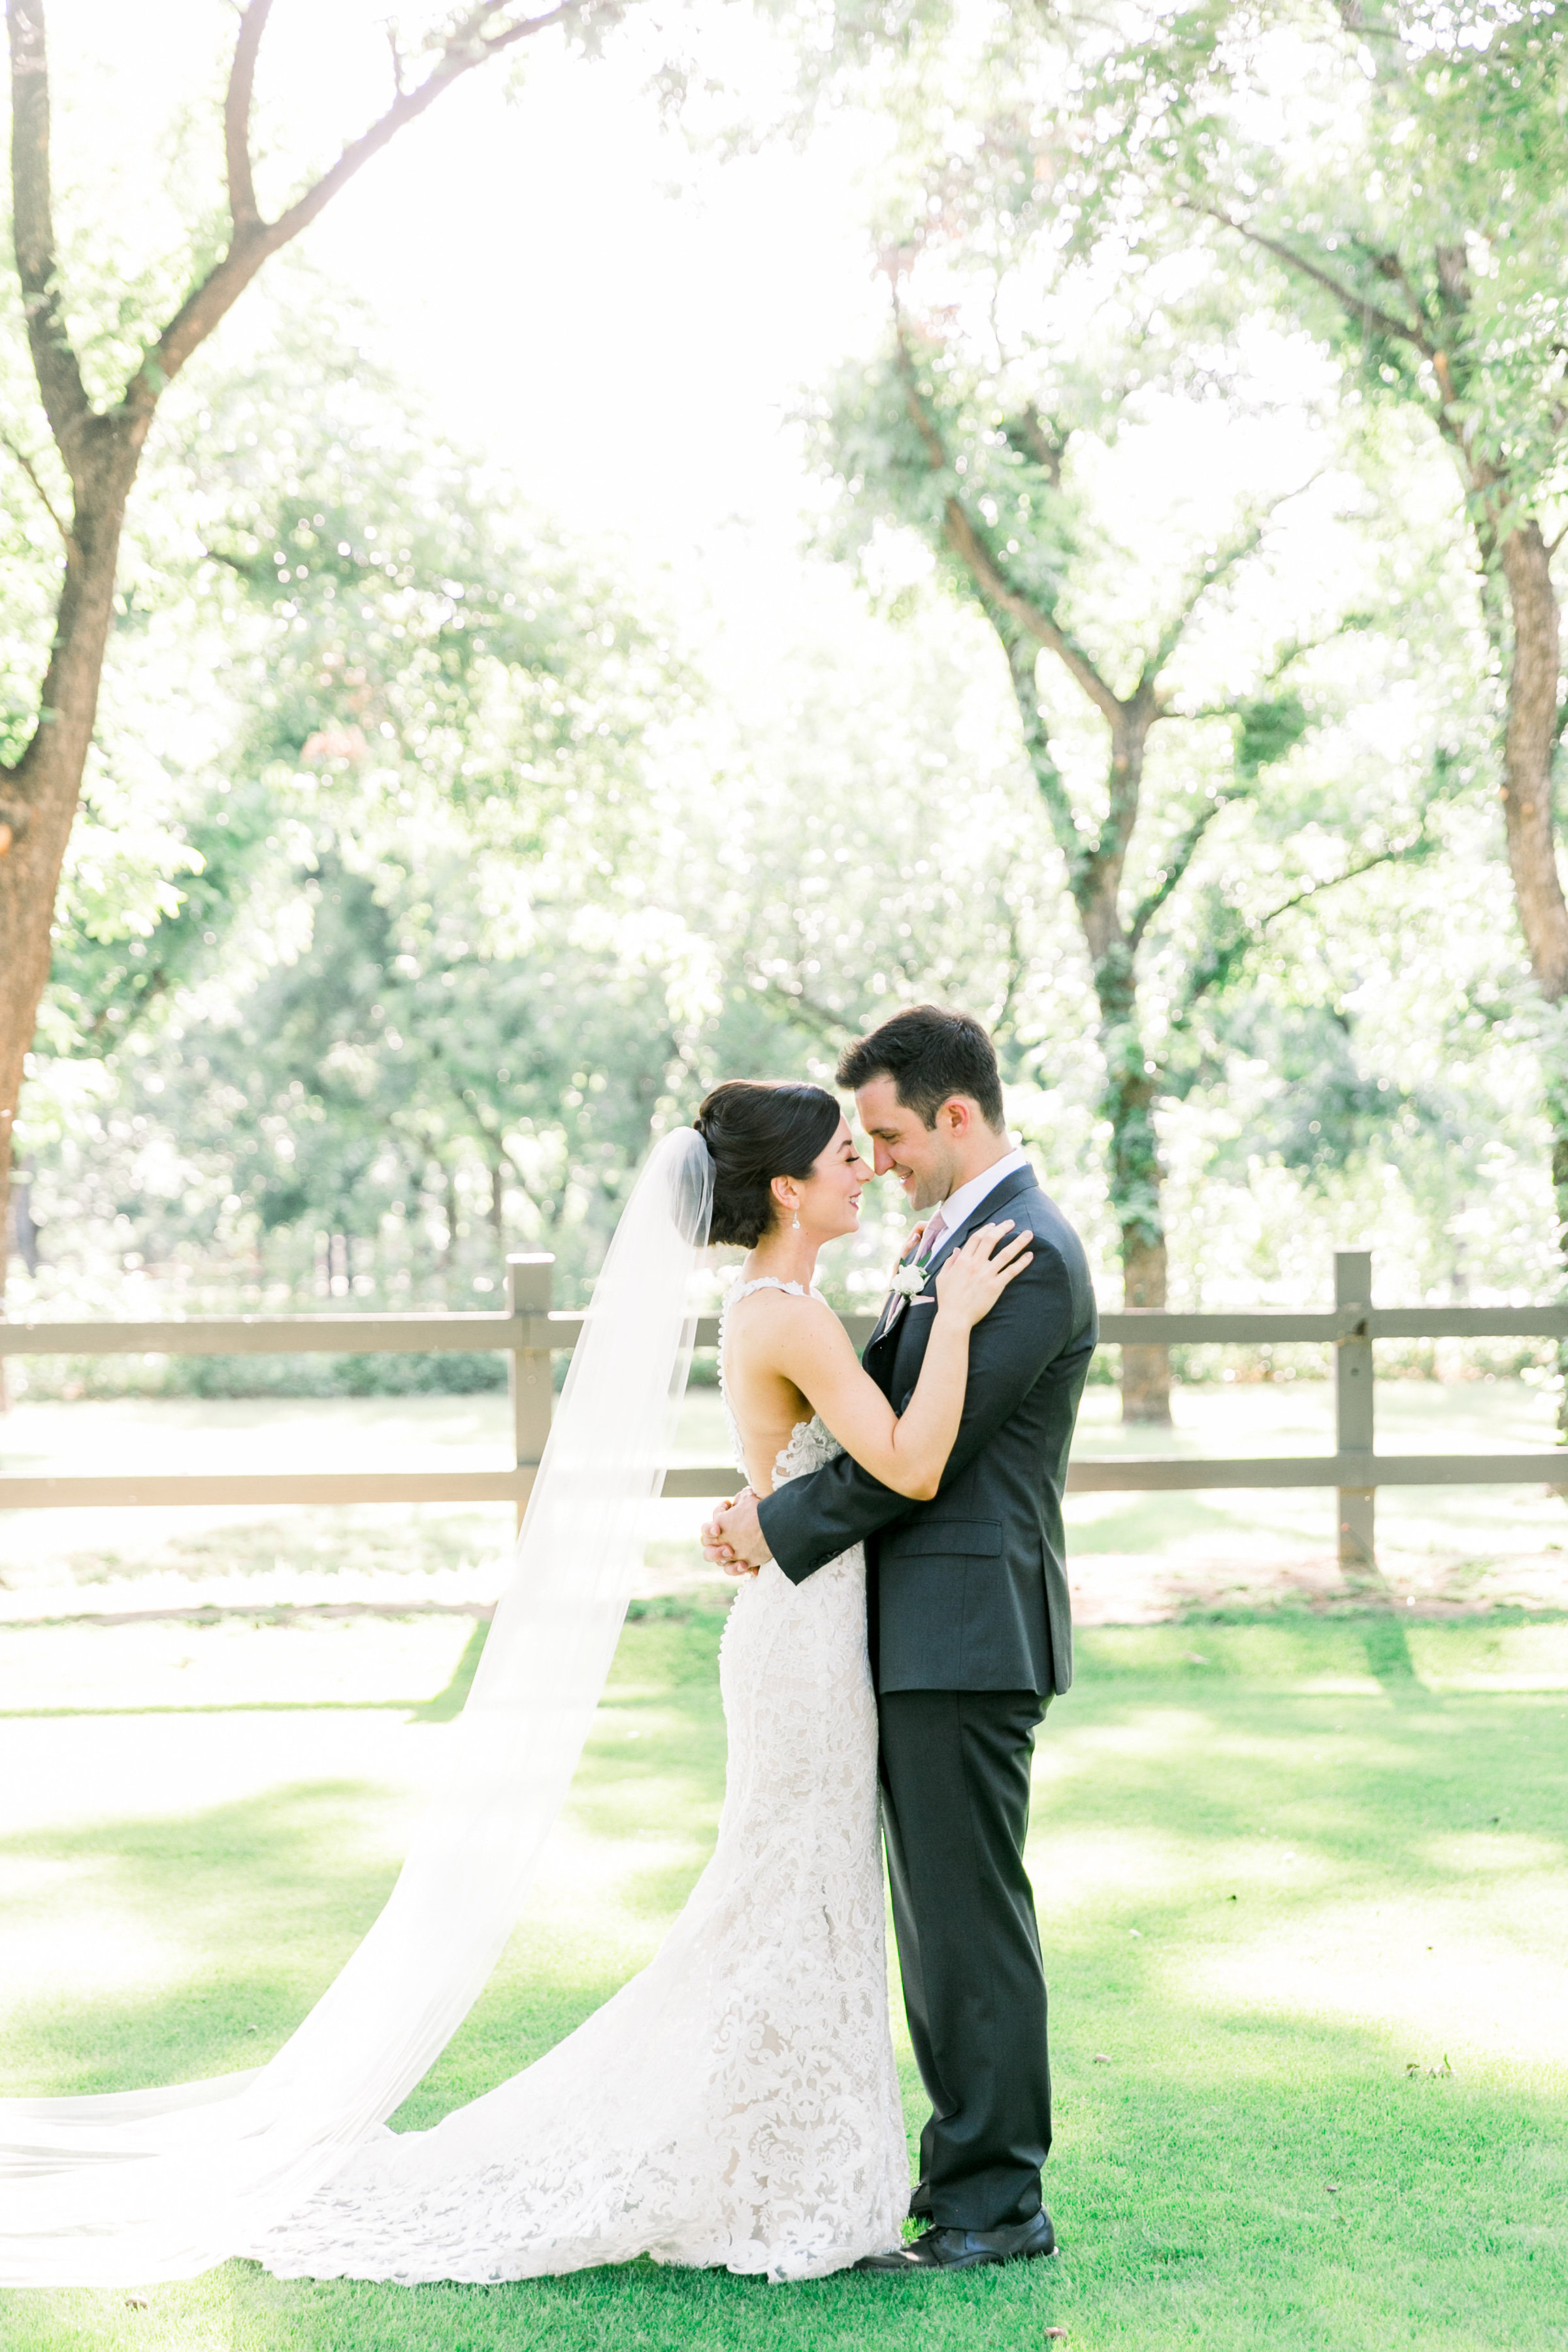 Karlie Colleen Photography - Arizona Wedding - Venue At The Grove - Maggie & Grant-436